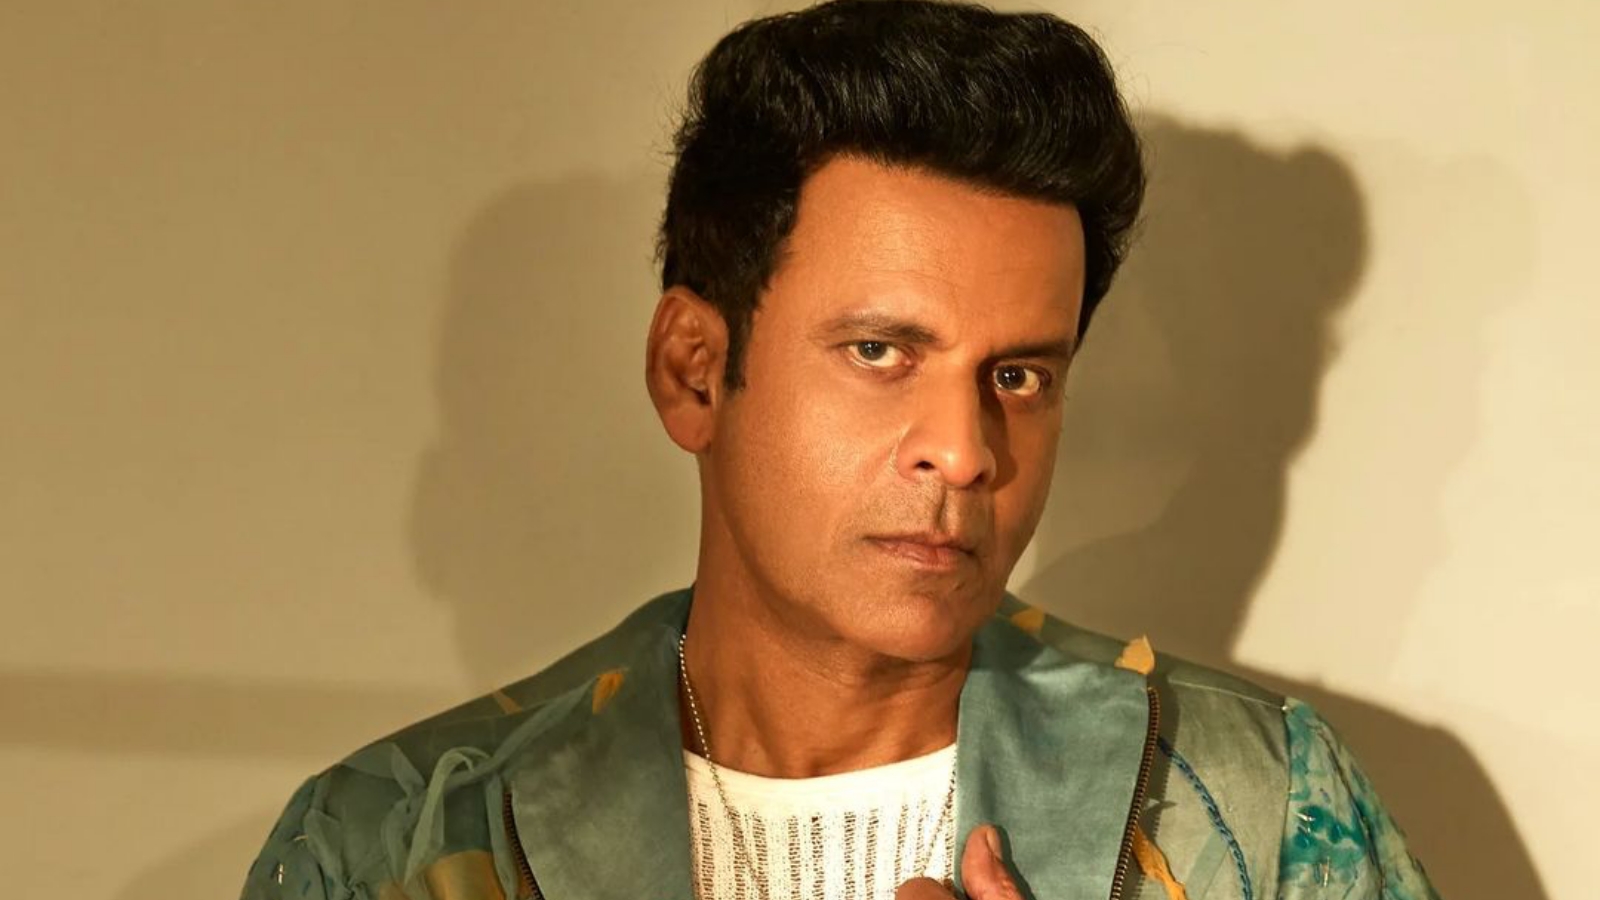 Manoj Bajpayee says he did films 'just for money' in his downtime: 'Needed  money to survive, never regretted it'